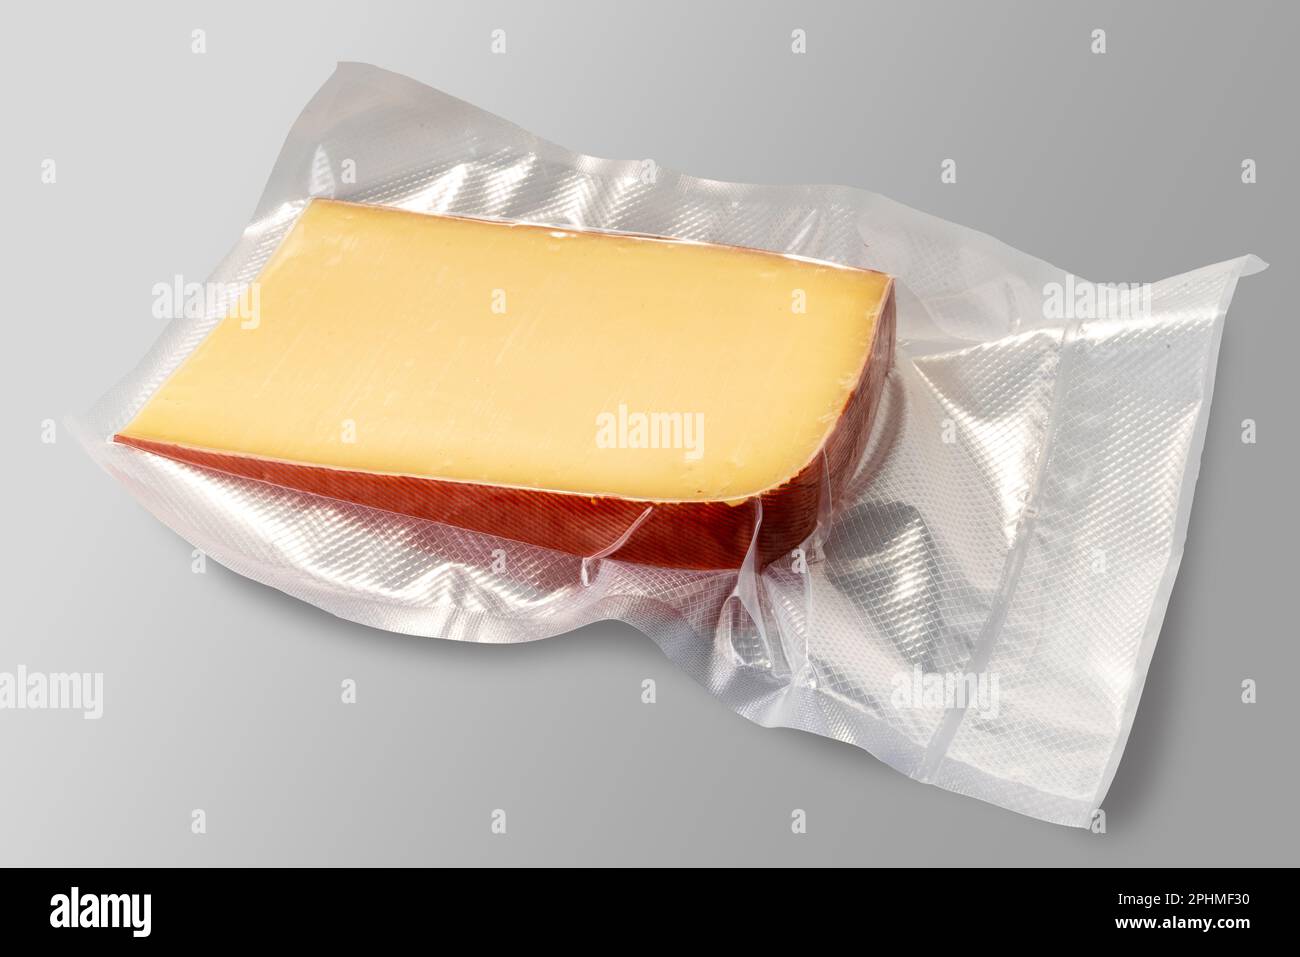 Fontal  cheese slice in vacuum pack for sous vide cooking isolated on gray background with clipping path included.clipping path included. Stock Photo